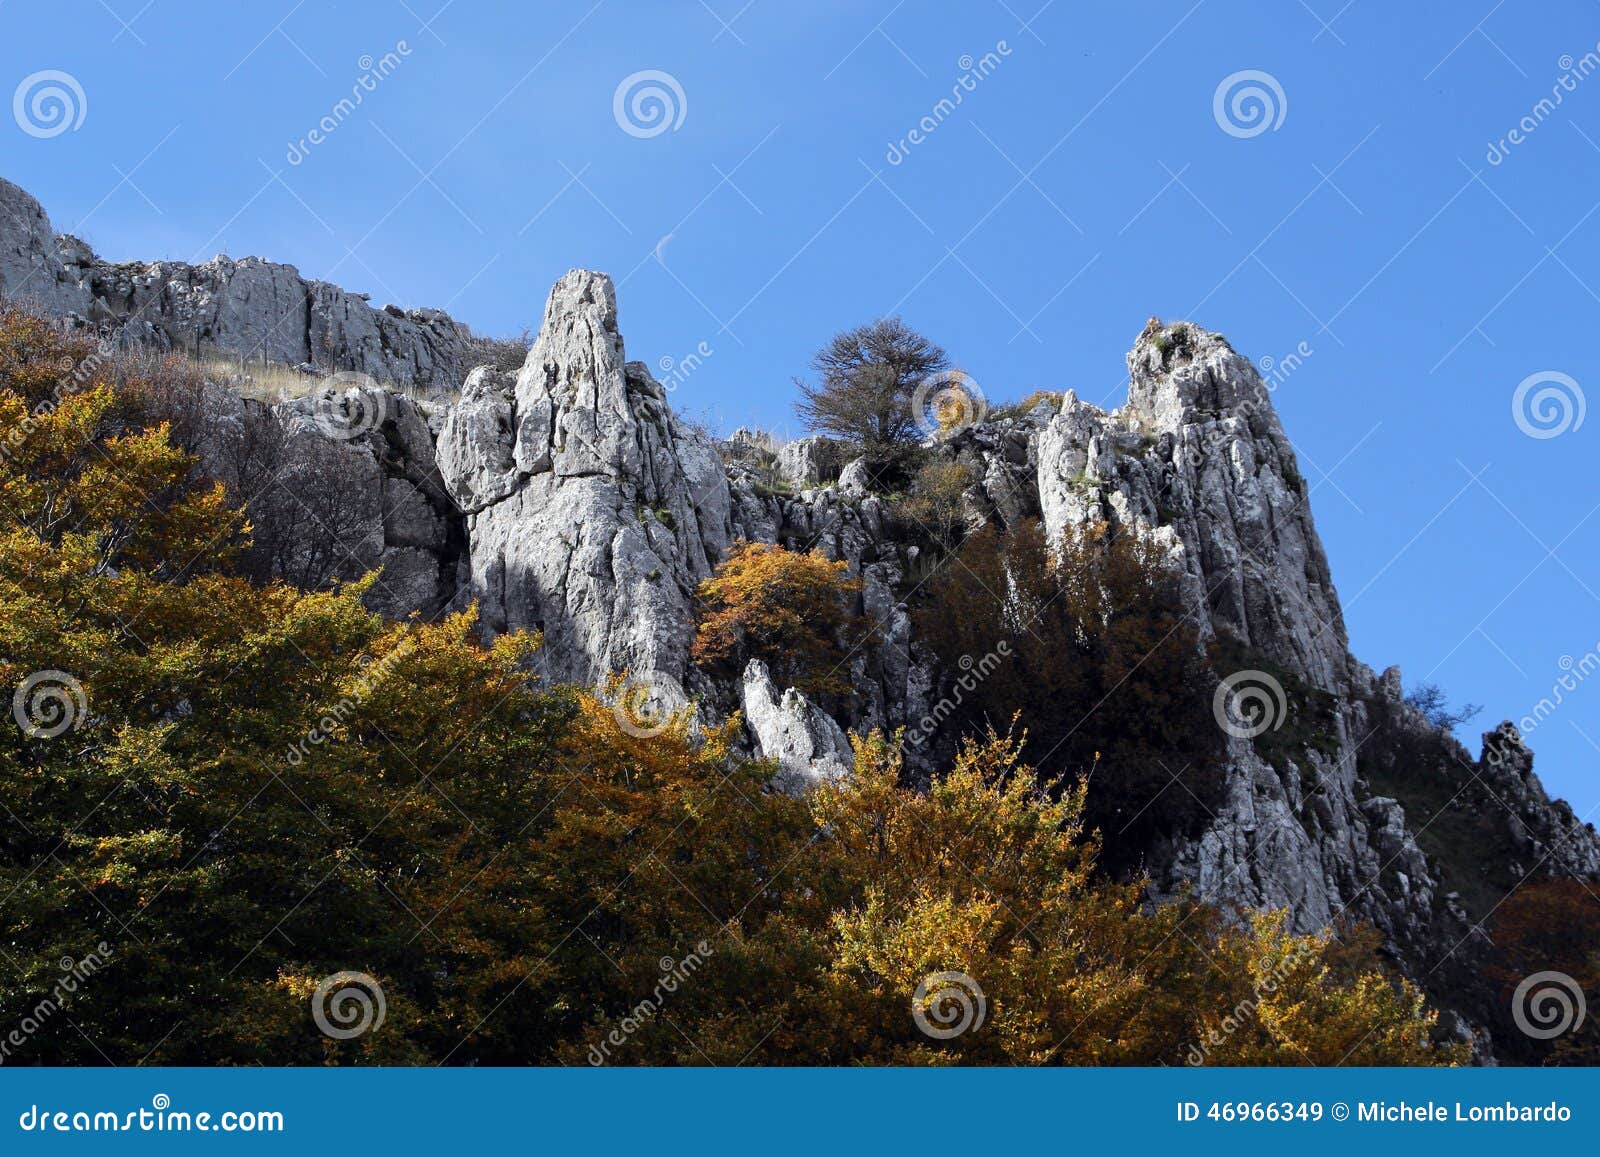 rock outcroppings in autumn, with the moon